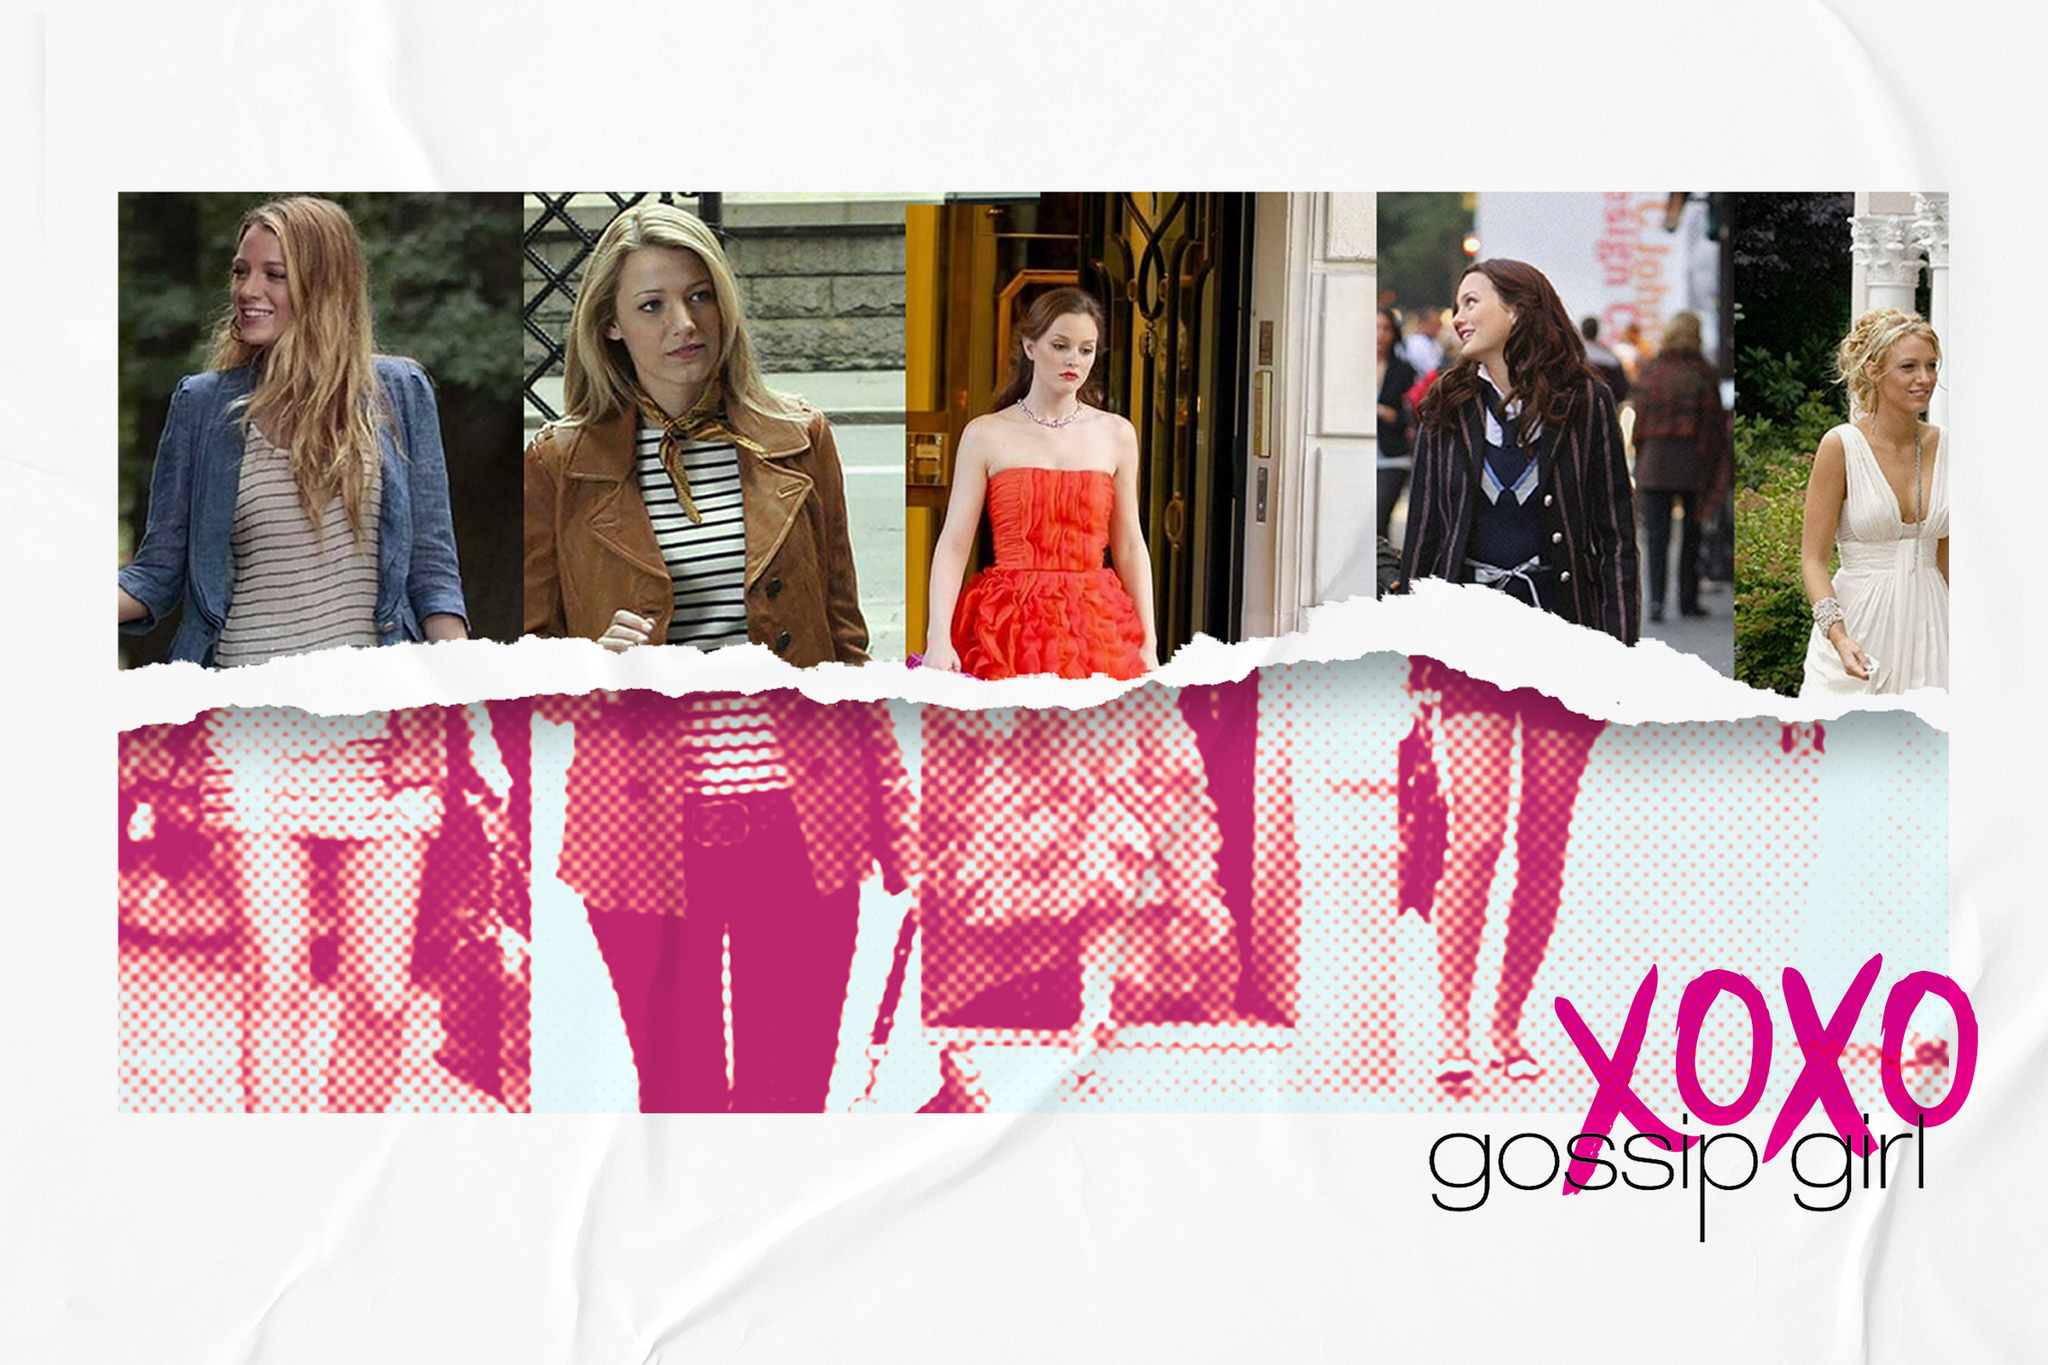 Gossip Girl most Iconic Styles with vegan and sustainable fashion items header